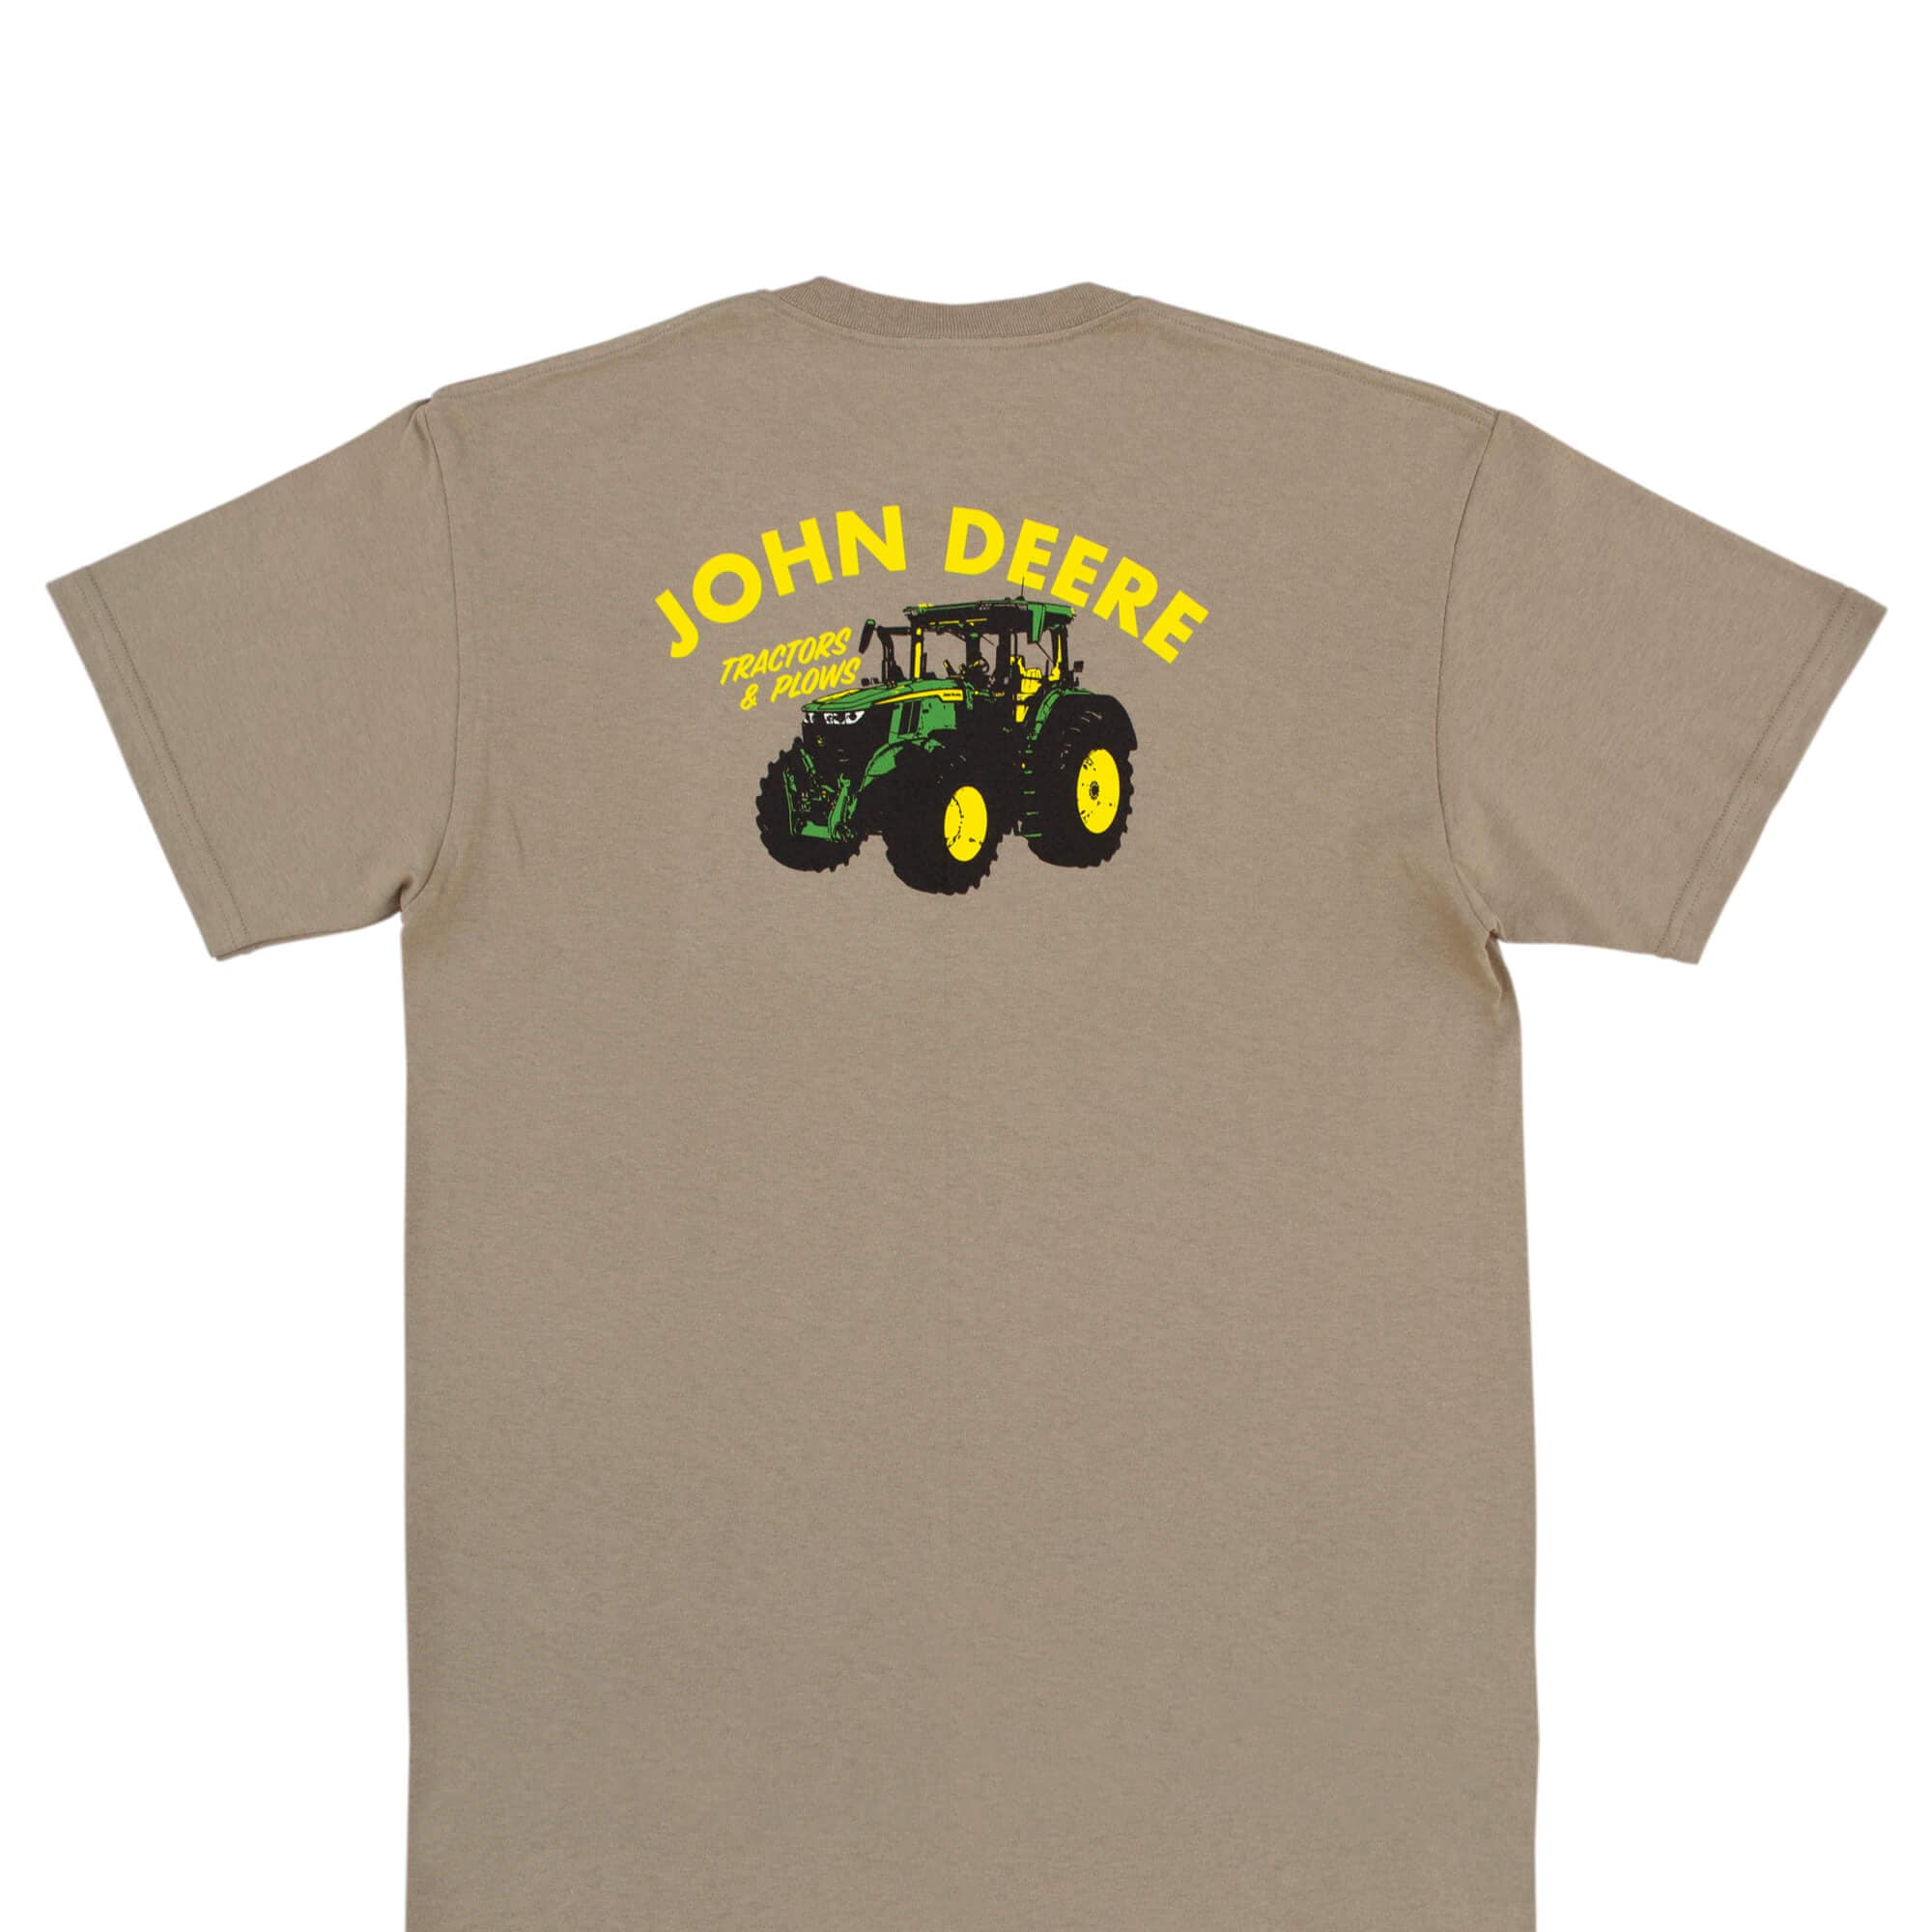 Deere Men's Textured Cotton Short sleeve Solid T-shirt Work Shirt (Large) Tops & Shirts at Lowes.com